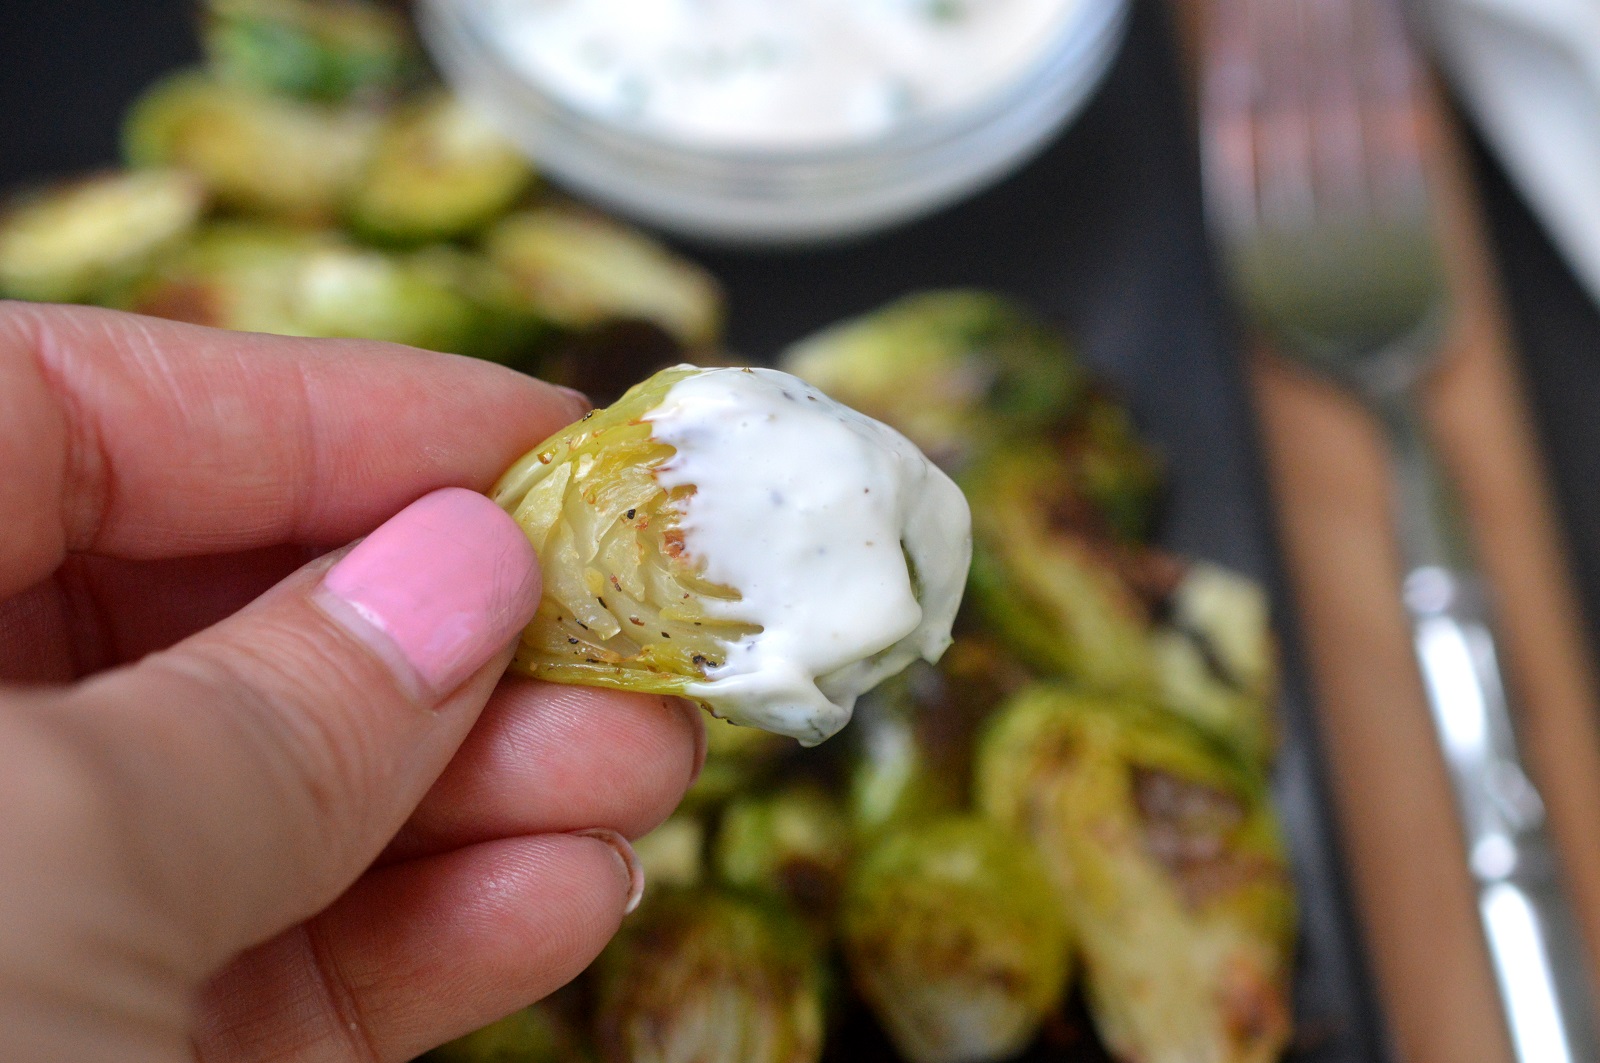 Brussels Sprouts Chips recipe make in the oven or air fryer